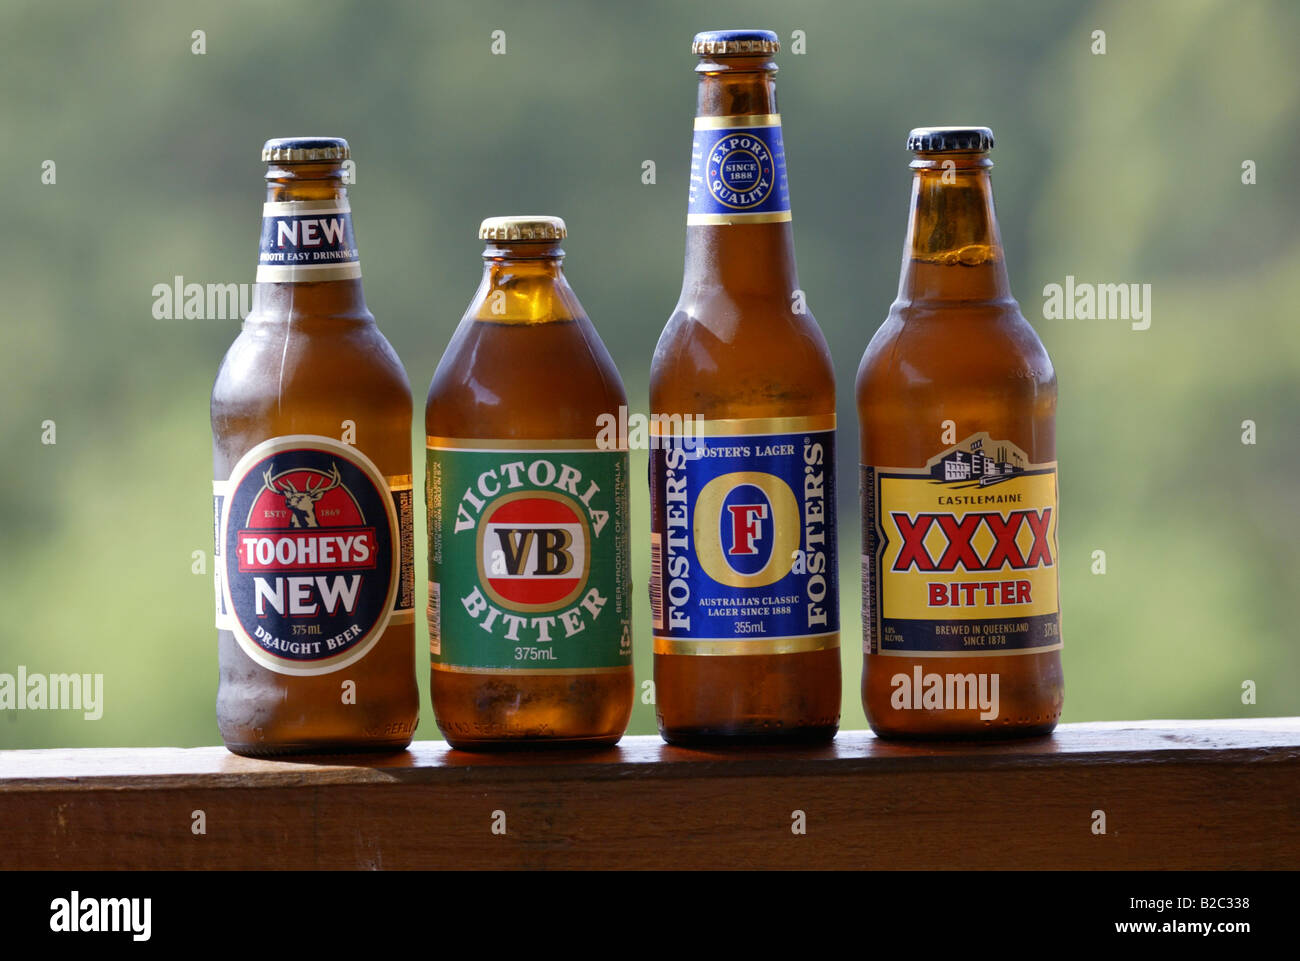 Beer bottles of Australian beers, Tooheys New, Victoria Bitter or VB, Foster's, and XXXX Stock Photo